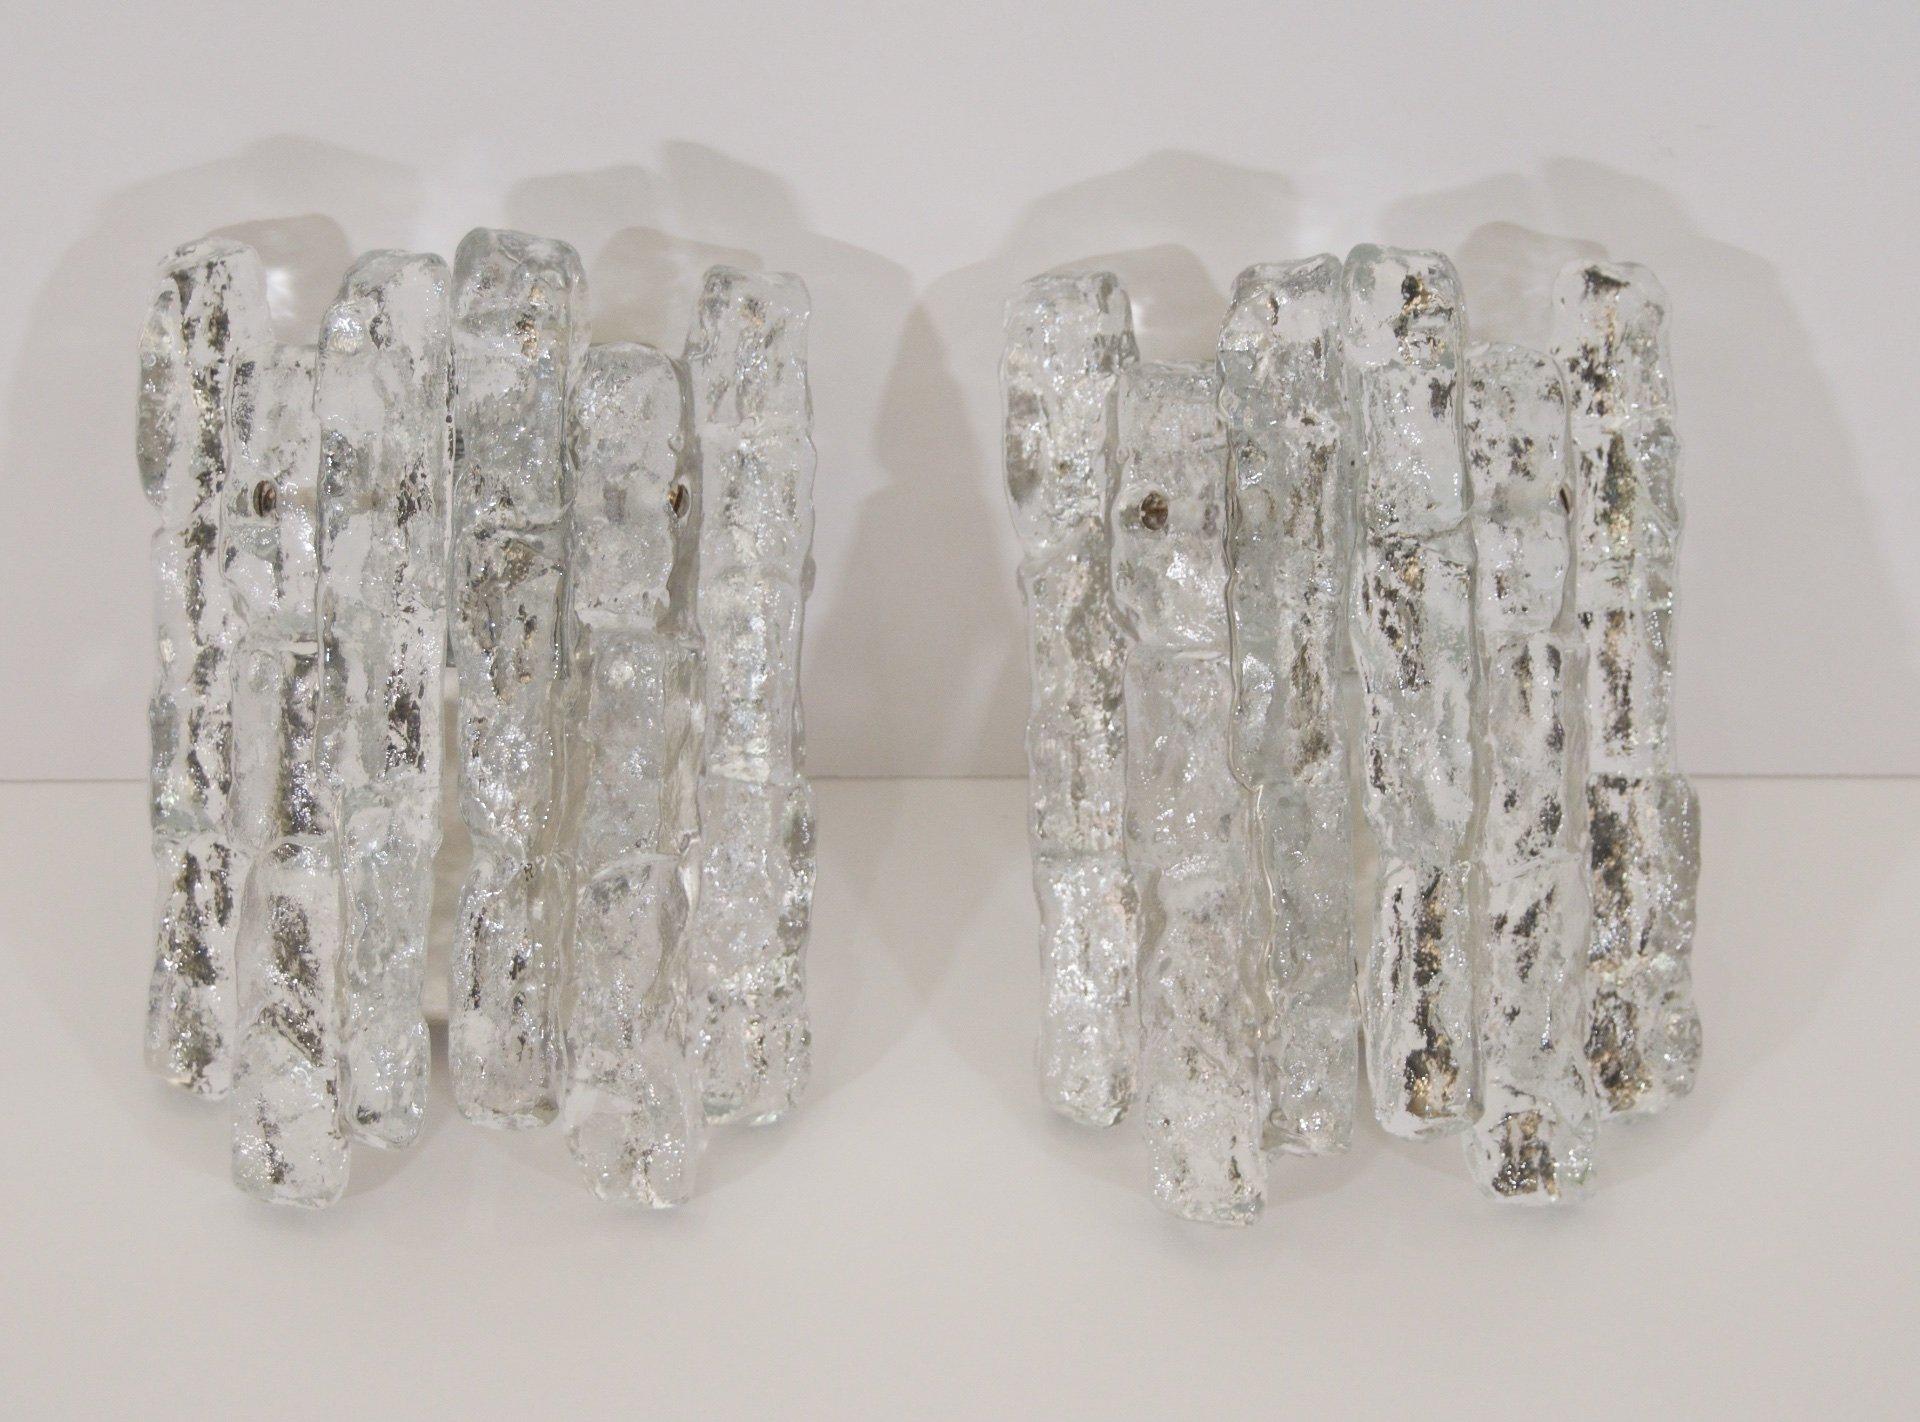 Kalmar Franken KG
Austria, 1960s

Excellent Kalmar ice glass wall sconces, each having two heavy pieces of ice glass. Petite size will work wonderfully in many spaces, ideal for narrow spaces.

One E-14 base bulb per sconce up to 40 watts, new